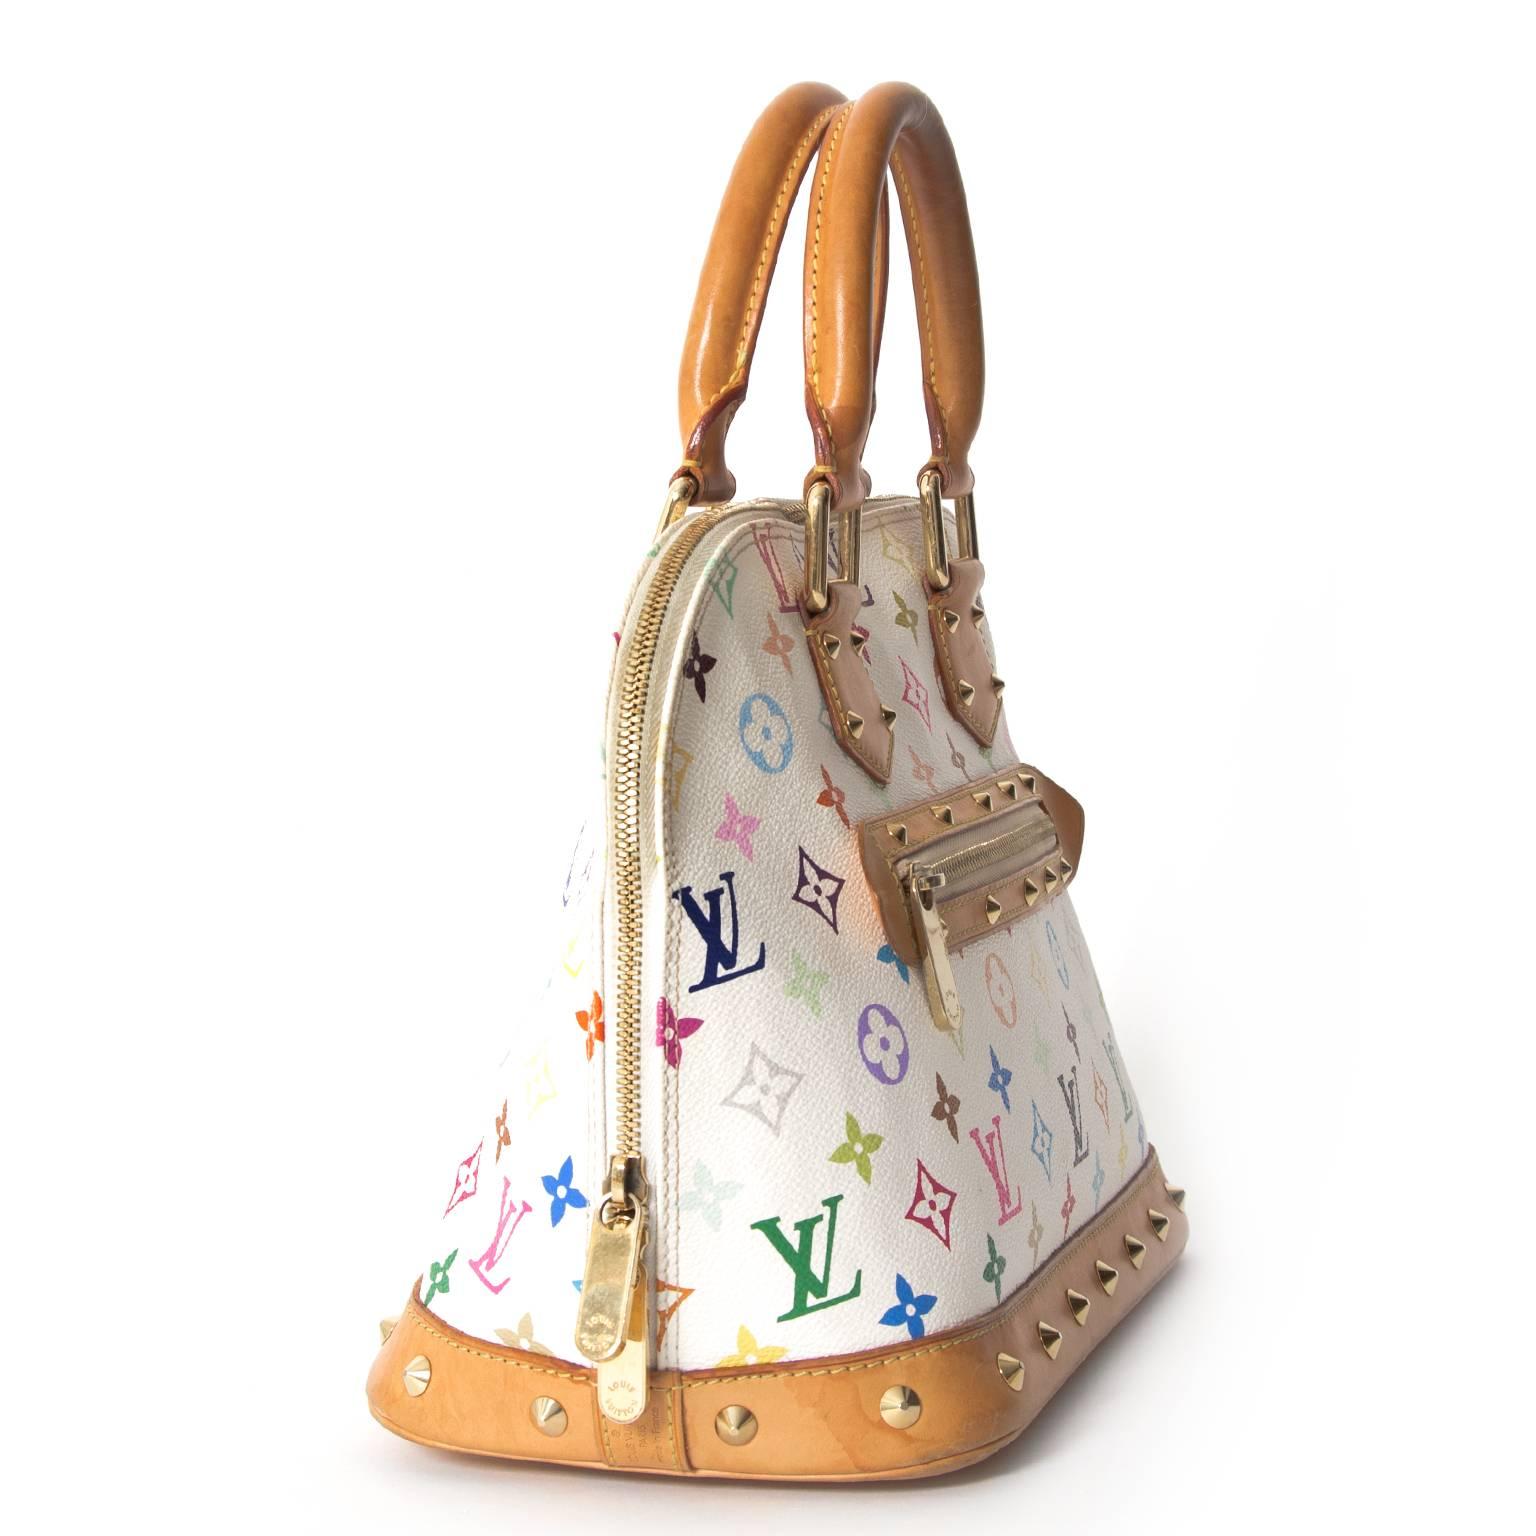 Enjoy the colorful monogram print on this special series Louis Vuitton Alma satchel created by Japanese artist Takashi Murakami.
After 12 years of being an IT-bag of many celebrities, the Murakami Multicolore line was discontinued by Louis Vuitton